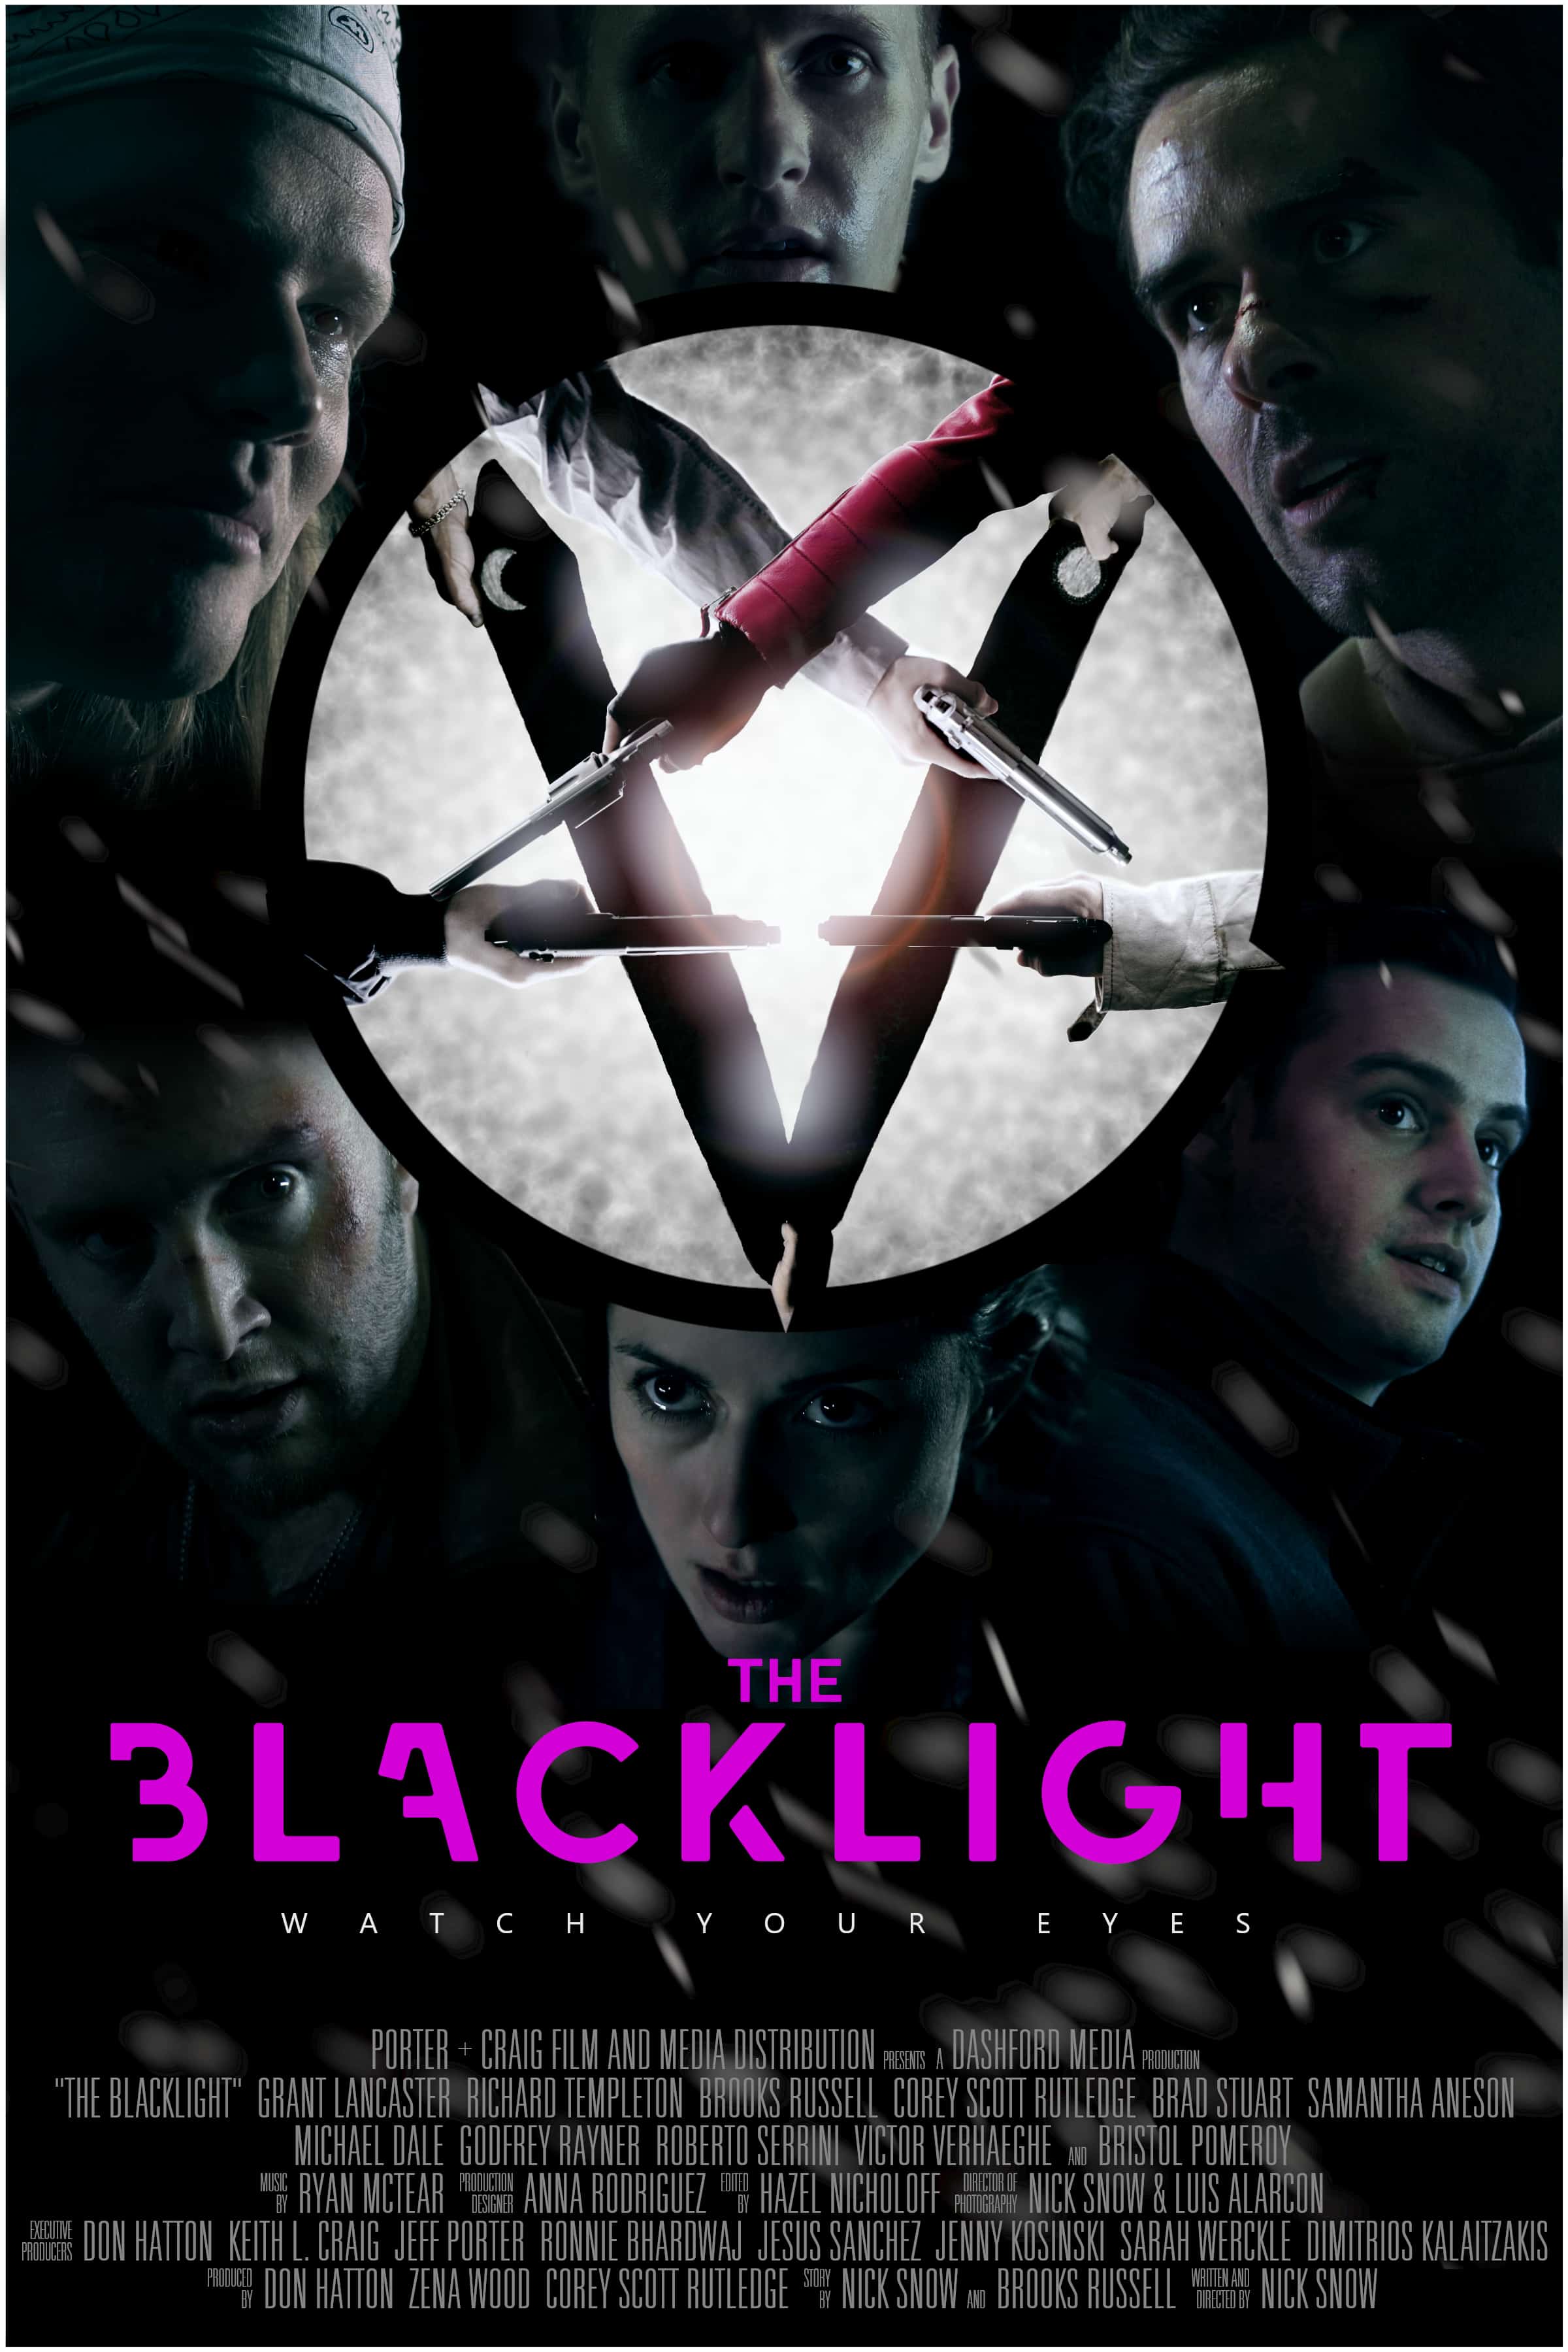 Introducing "The Blacklight": A Supernatural Thriller by Dashford Media and Director Nick Snow 27